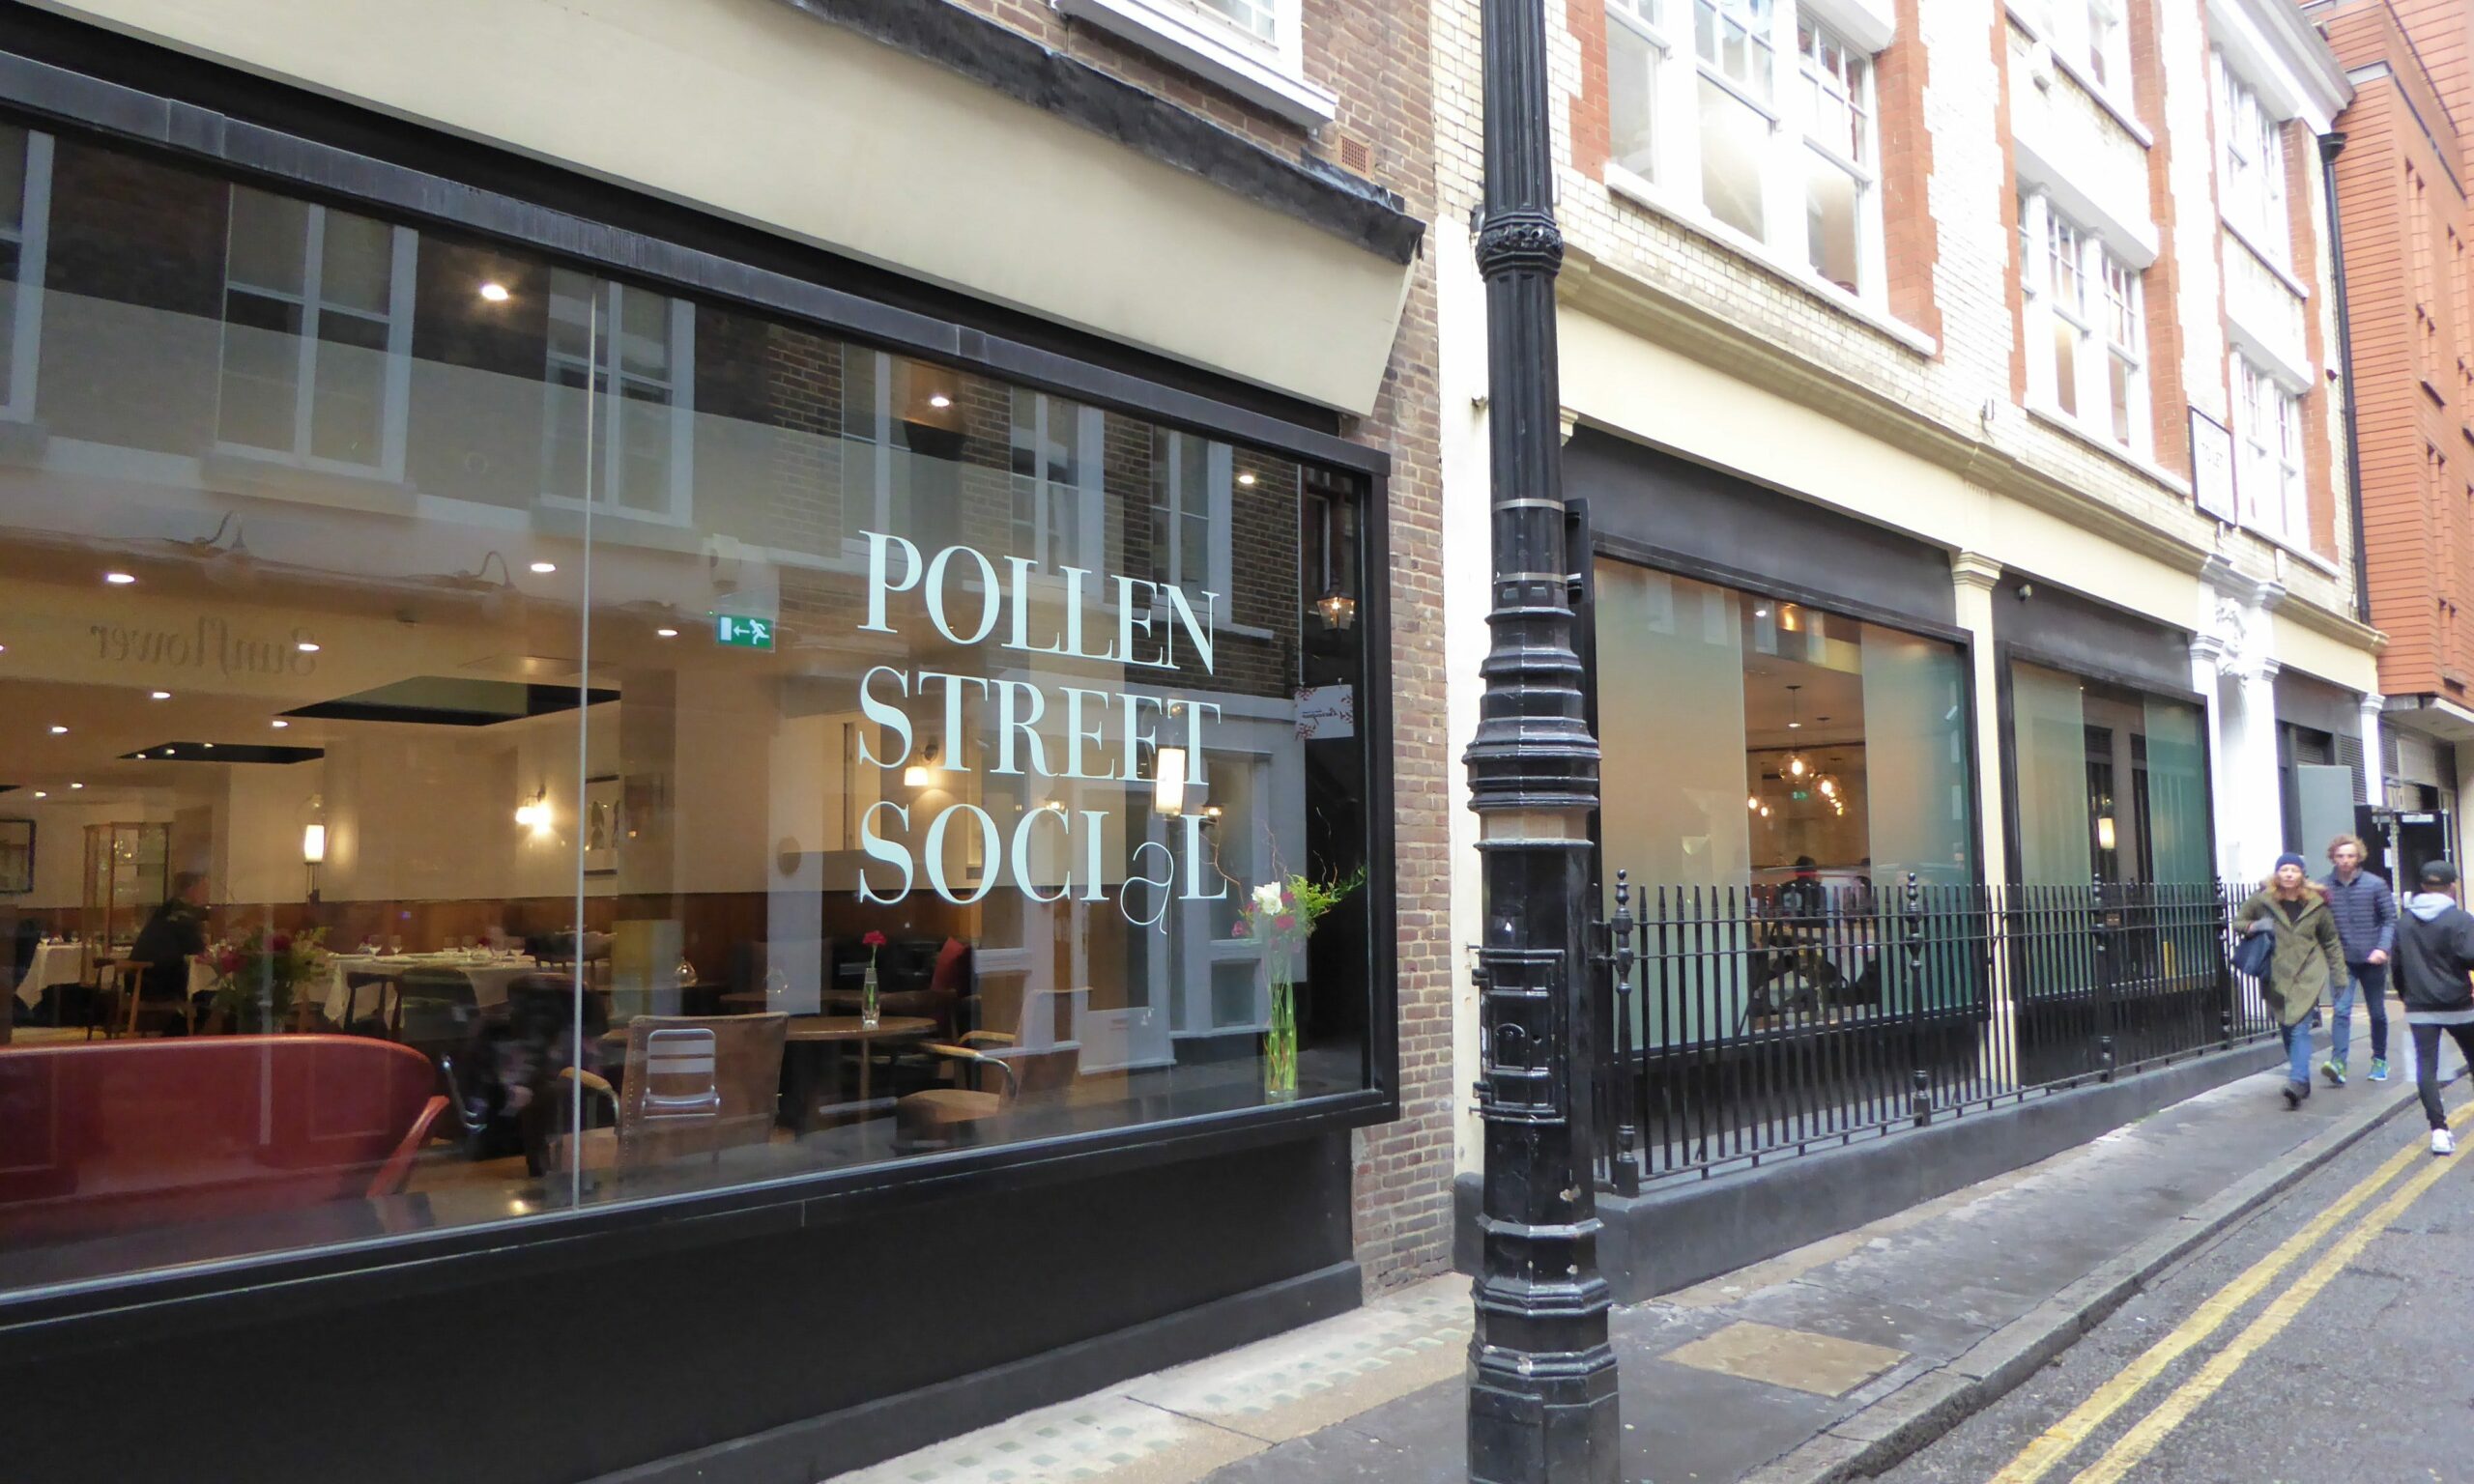 michelin star restaurant review pollen street social in london a must try for foodies